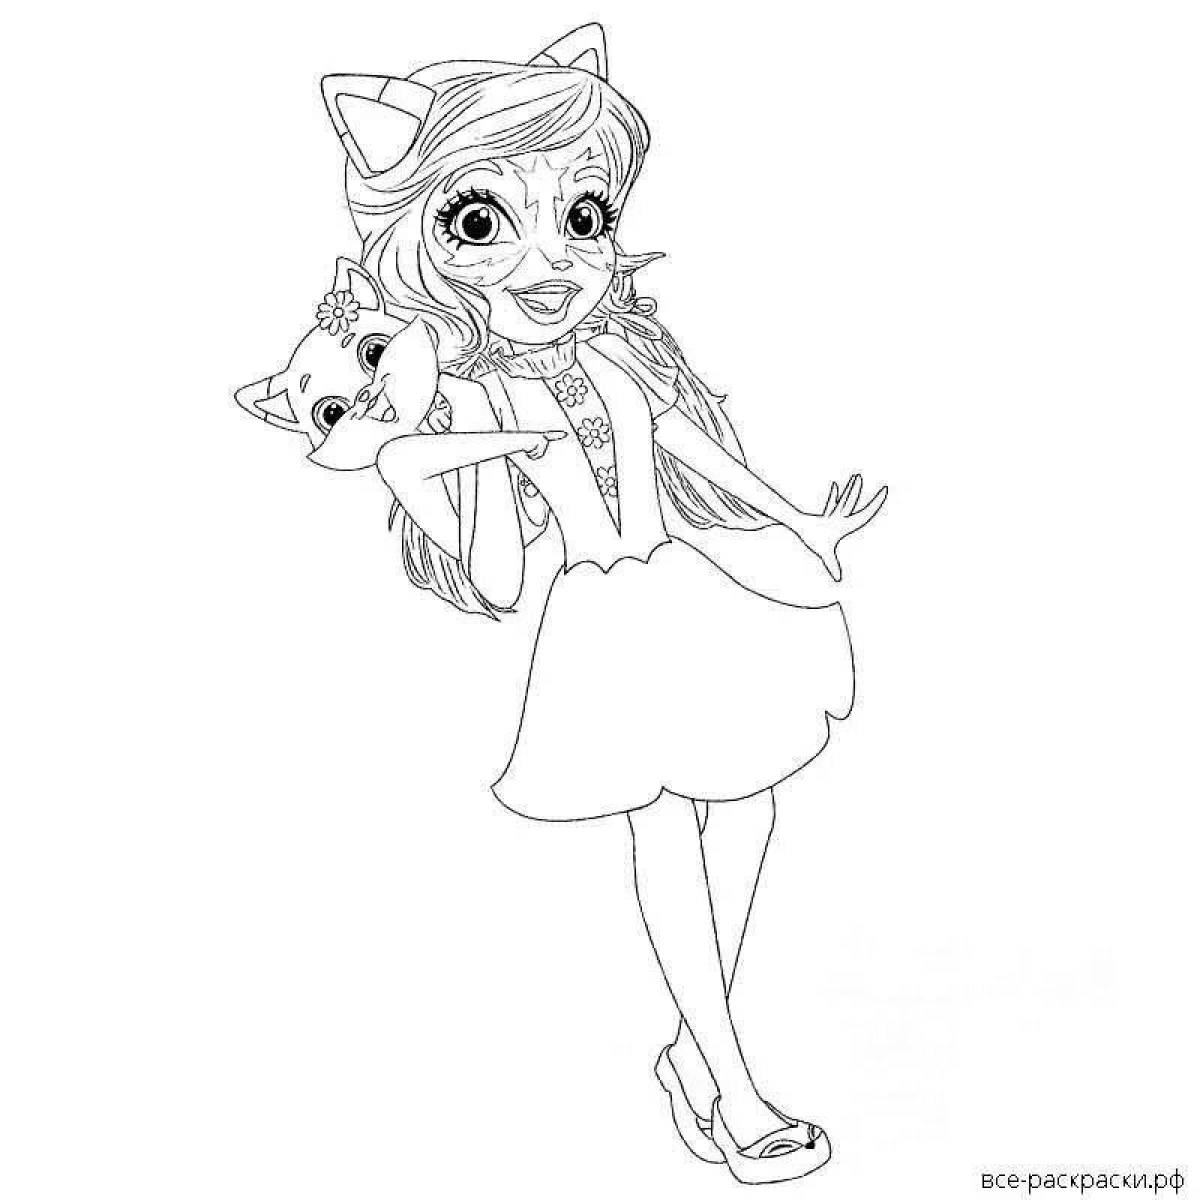 Cute enchenchimals coloring pages